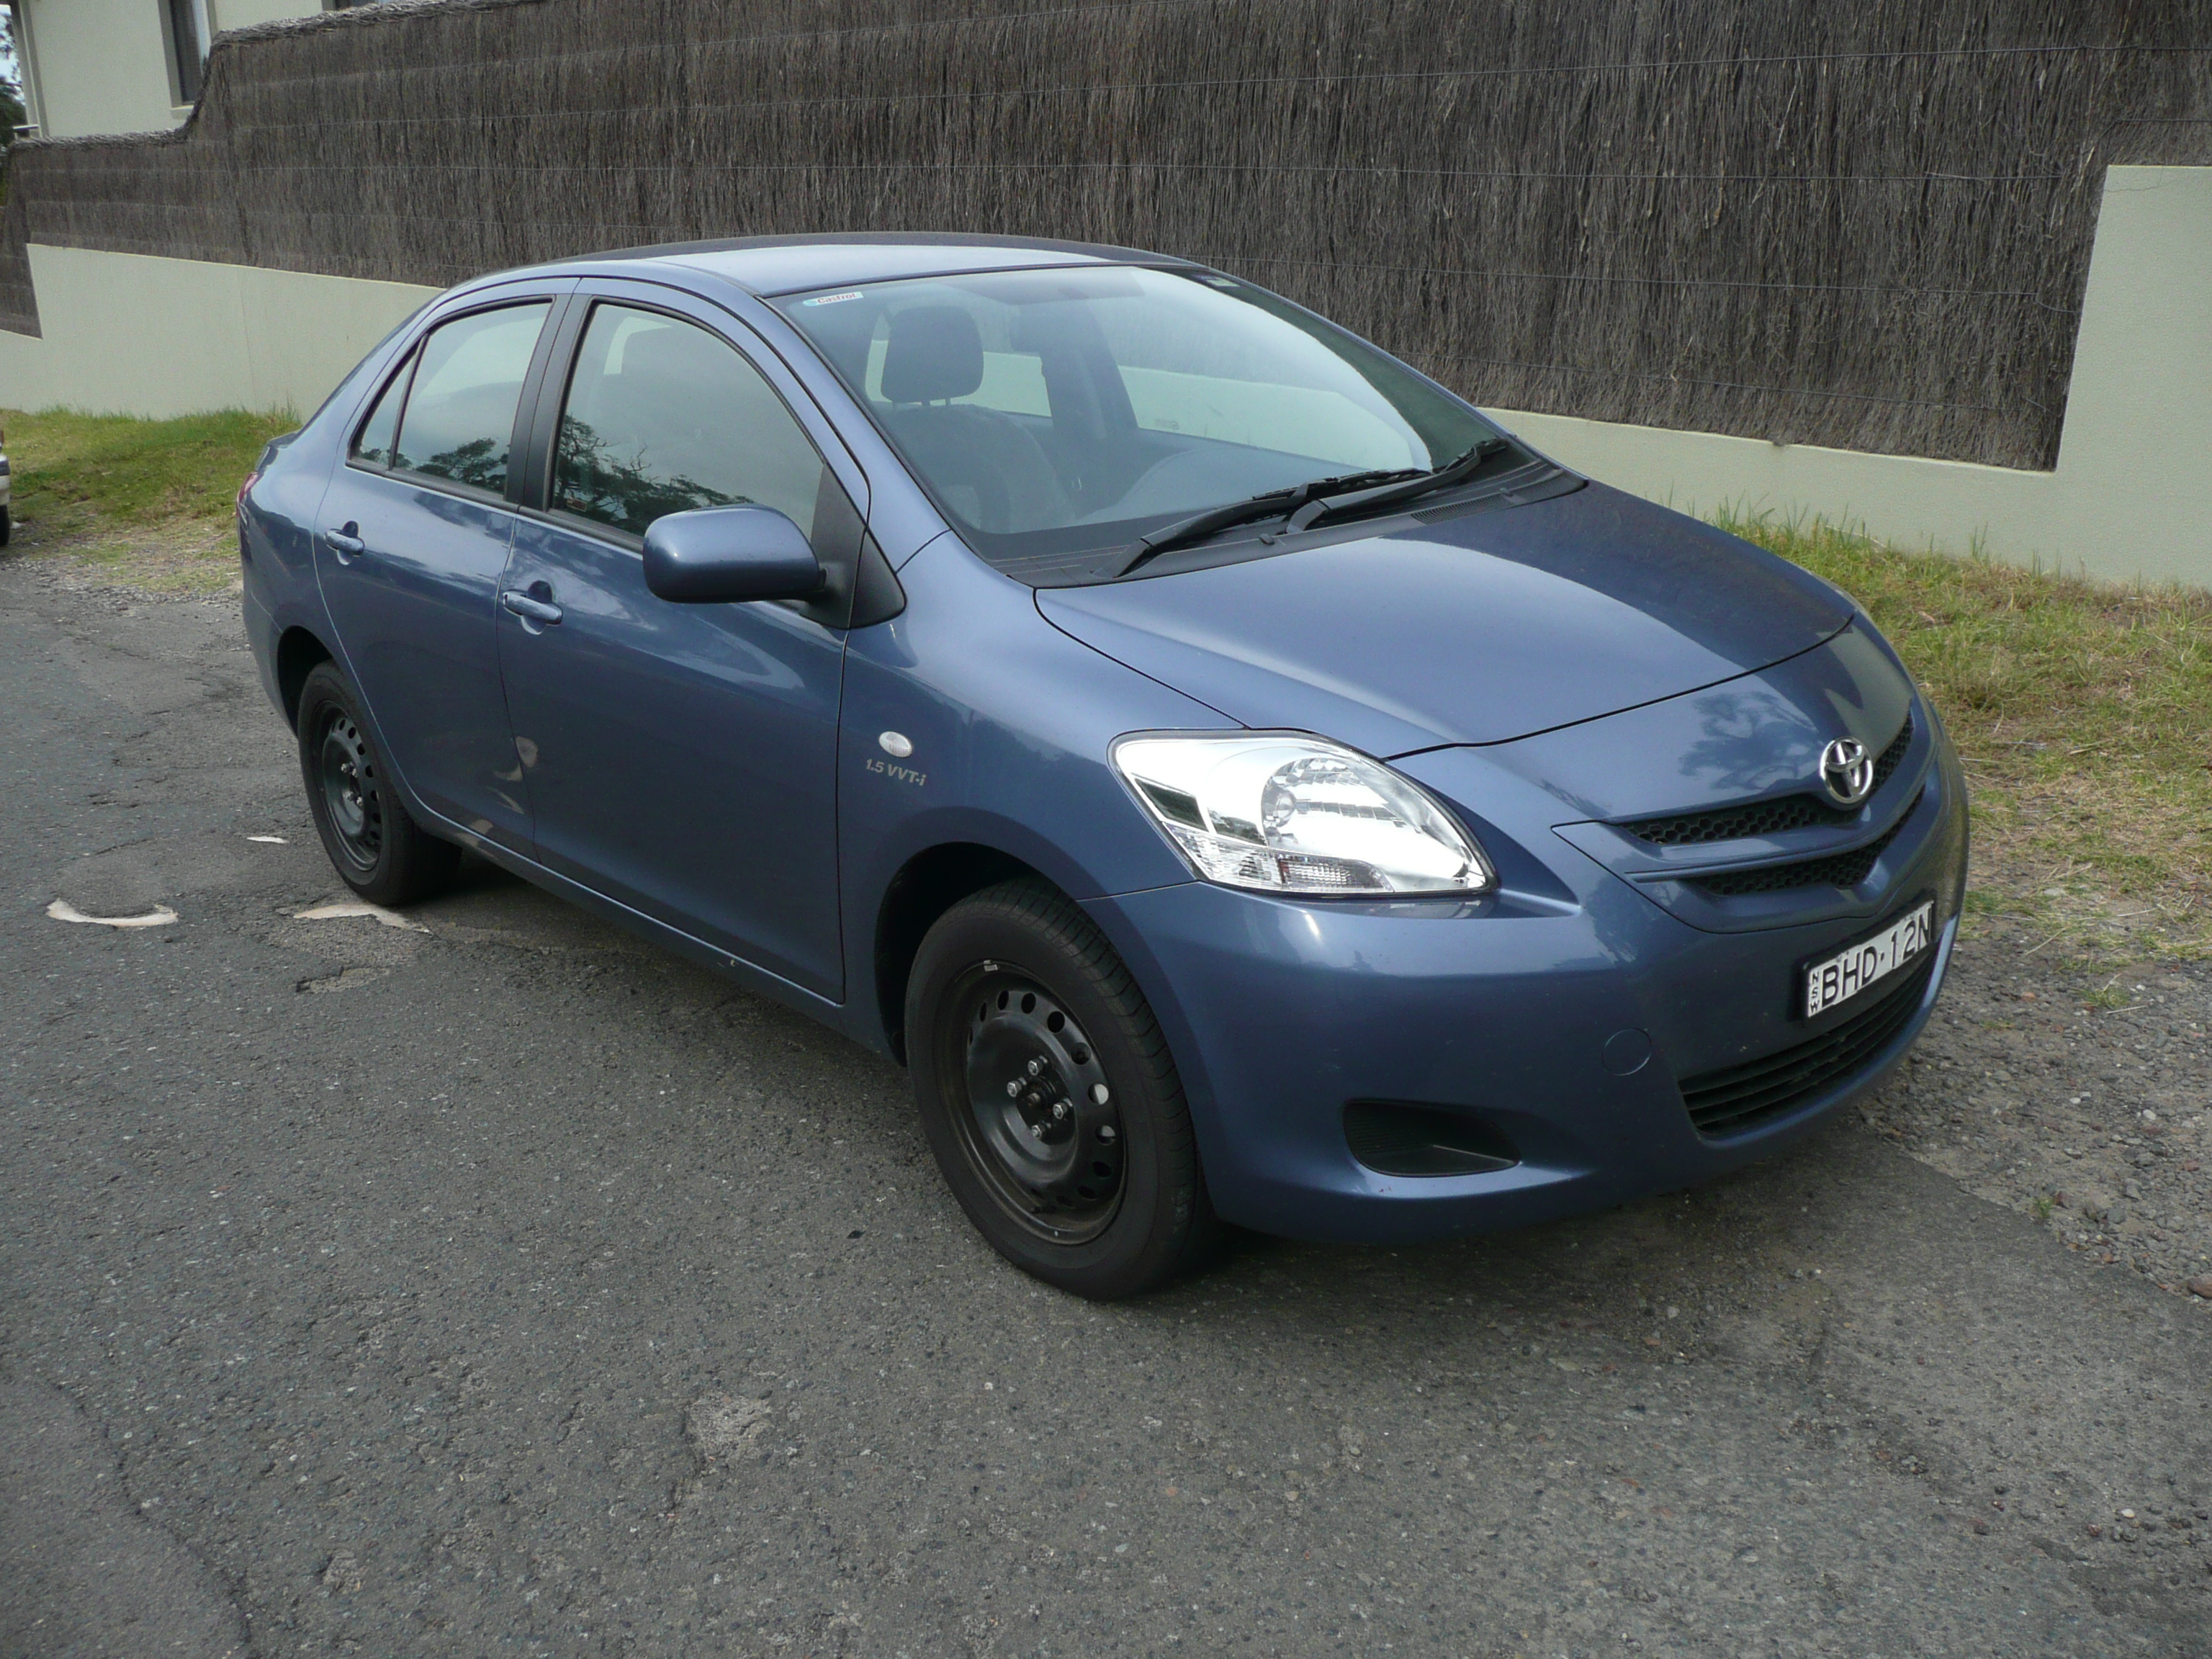 2008 toyota yaris trade in value #3